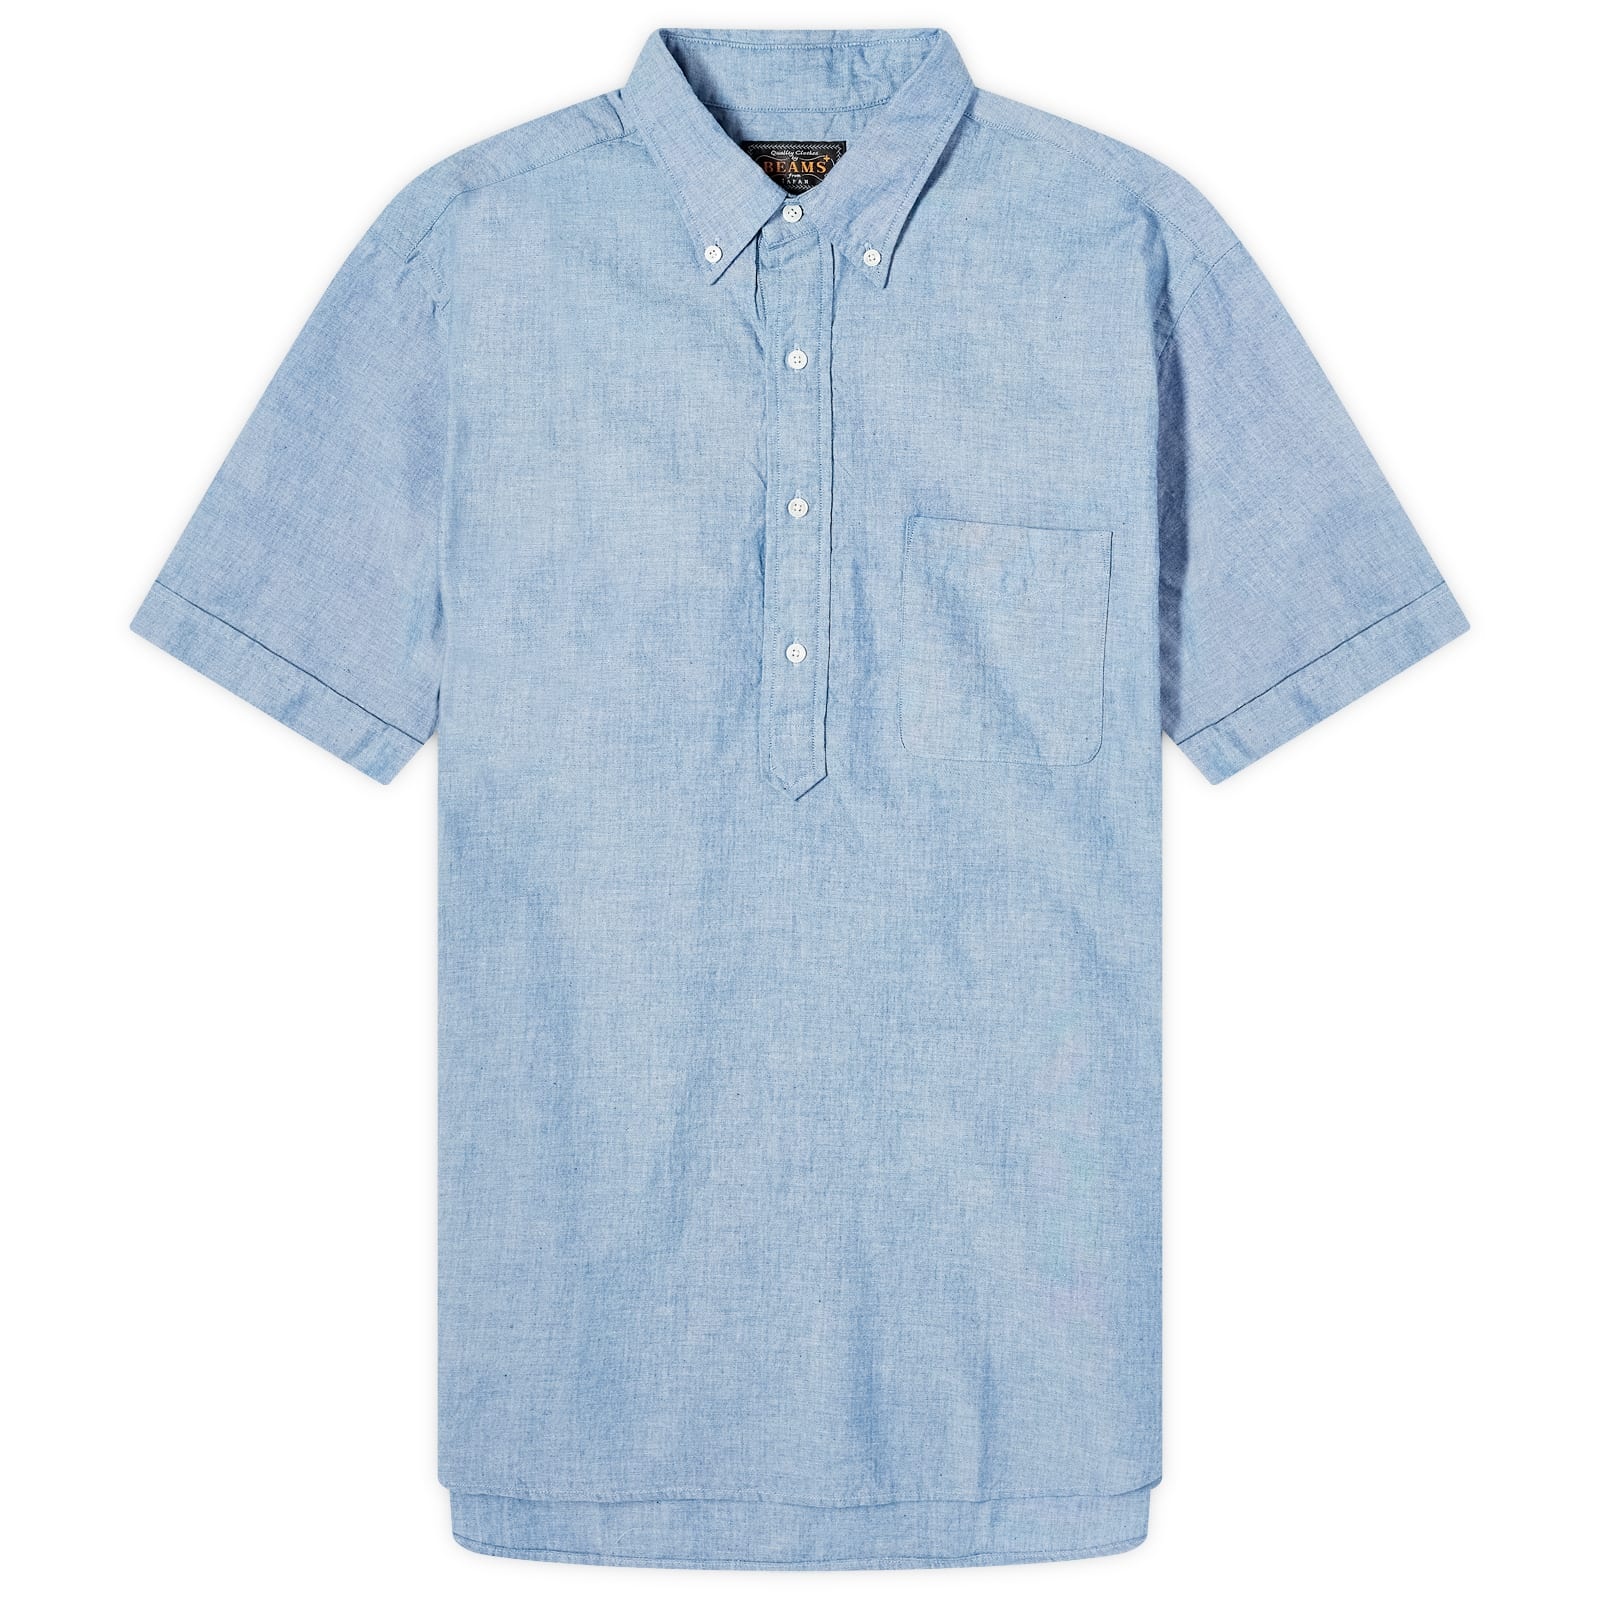 Beams Plus Button Down Popover Short Sleeve Chambray Shirt - 1